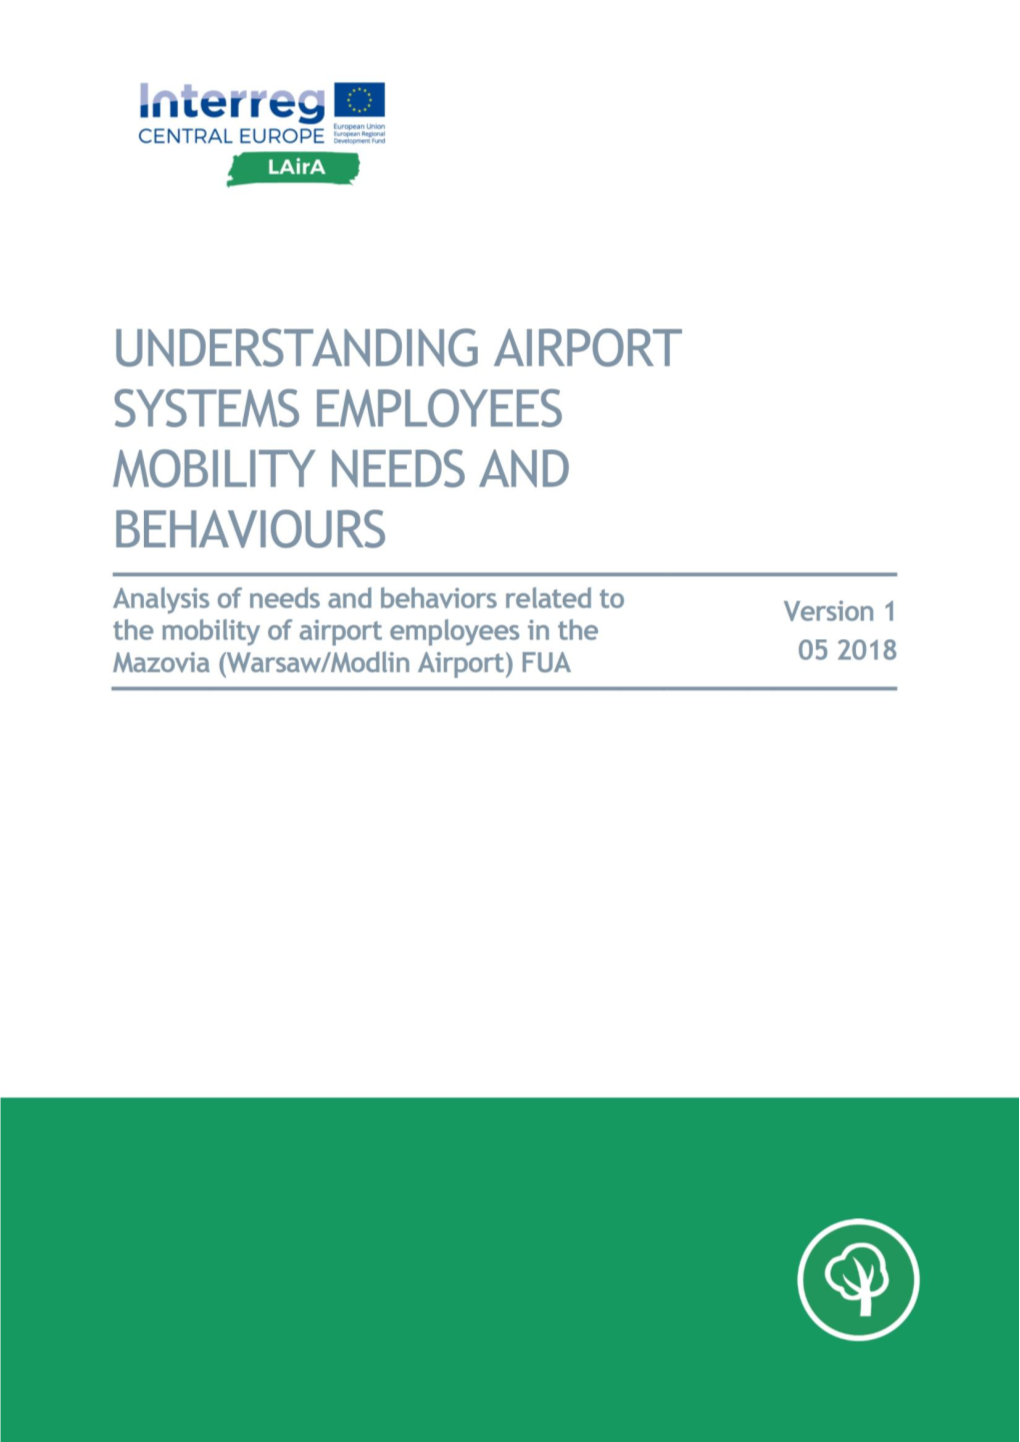 Mazovia FUA Report on Airports Employees Mobility Needs And